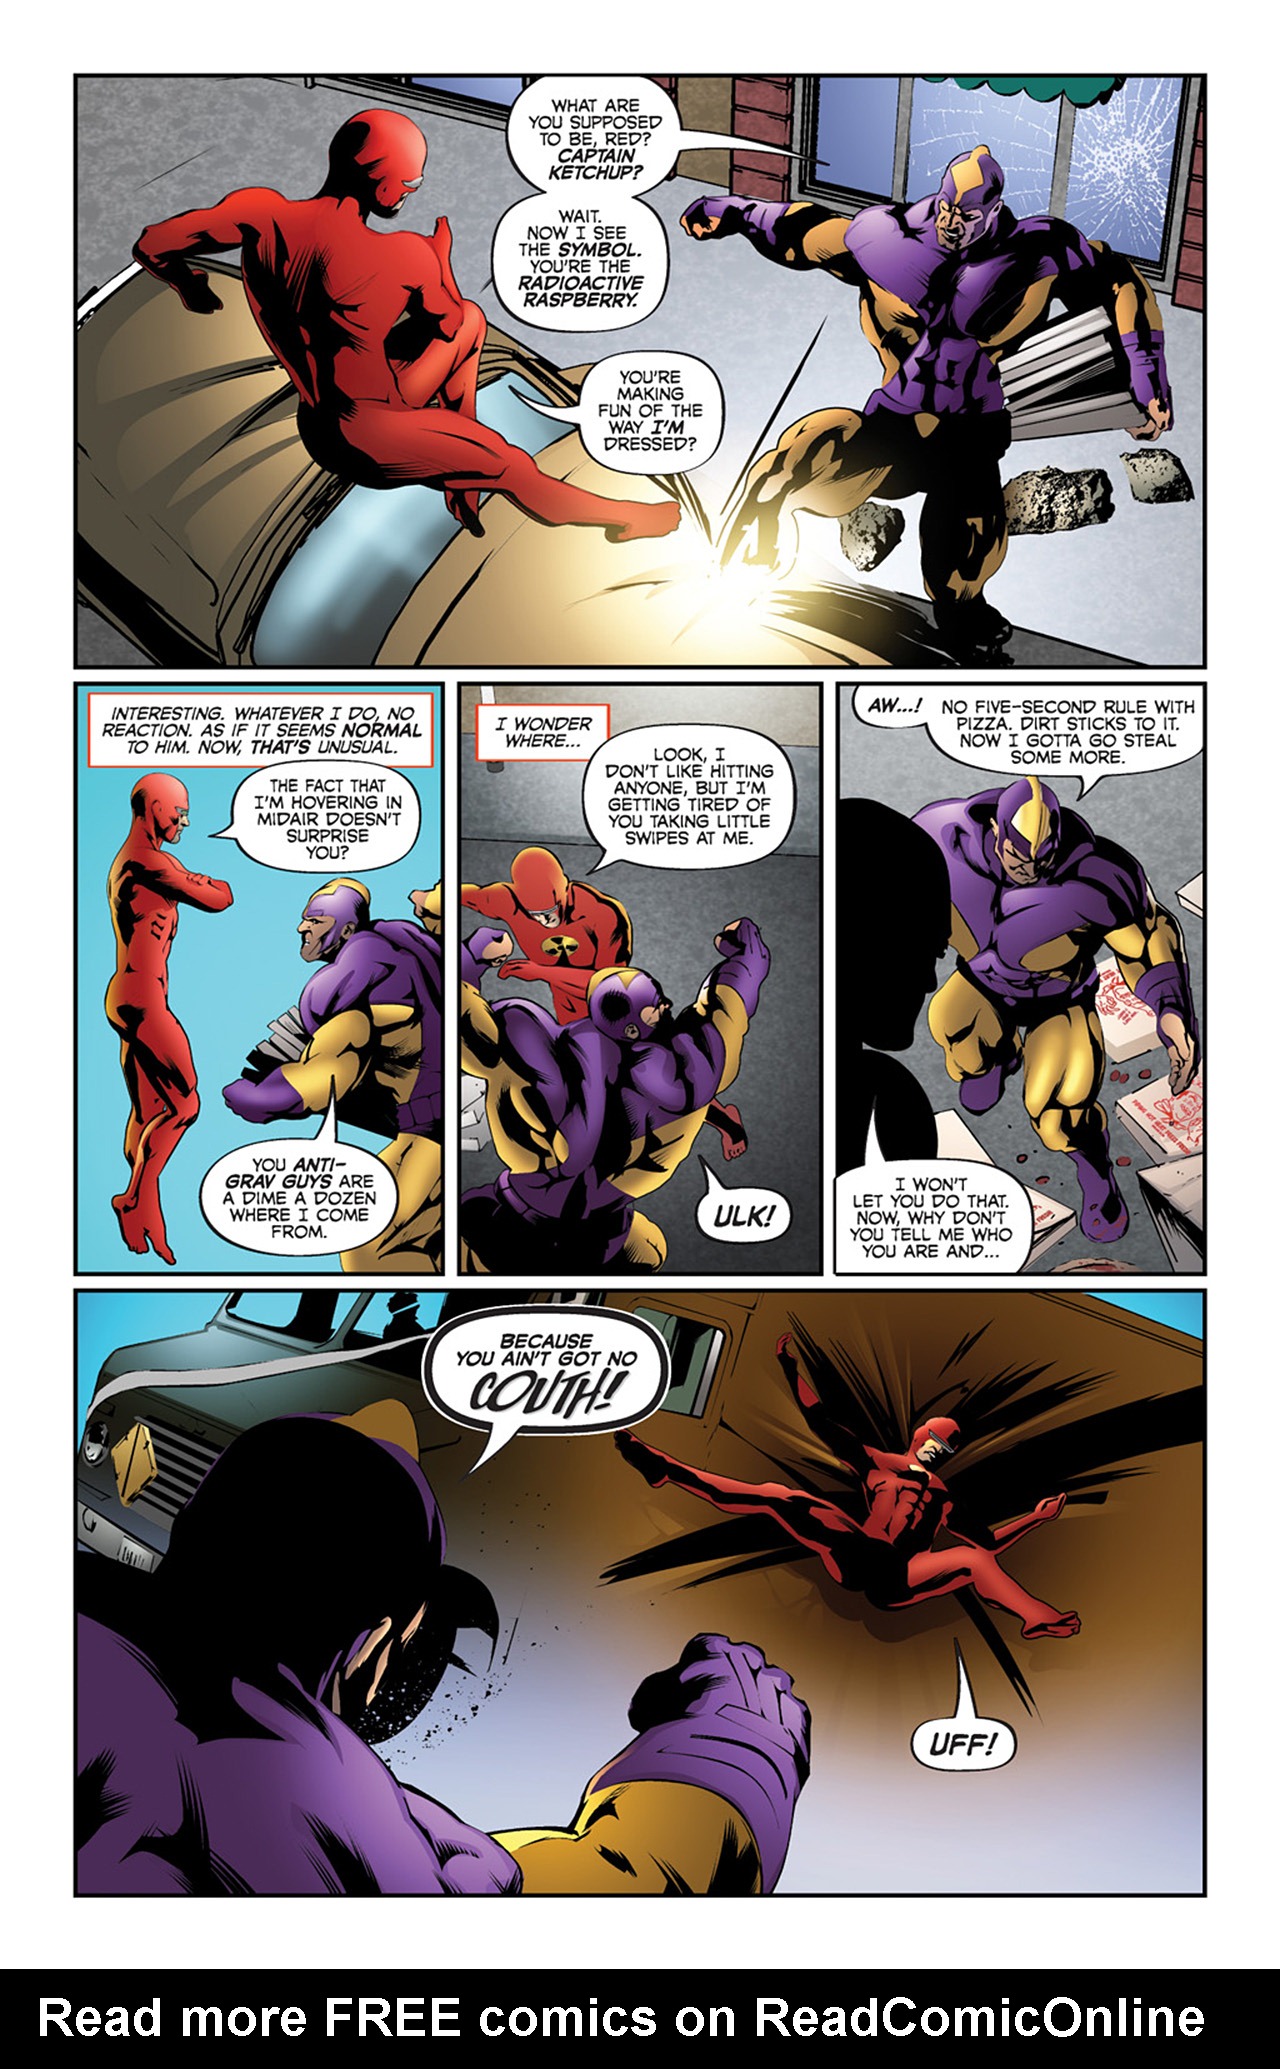 Doctor Solar, Man of the Atom (2010) Issue #1 #2 - English 4